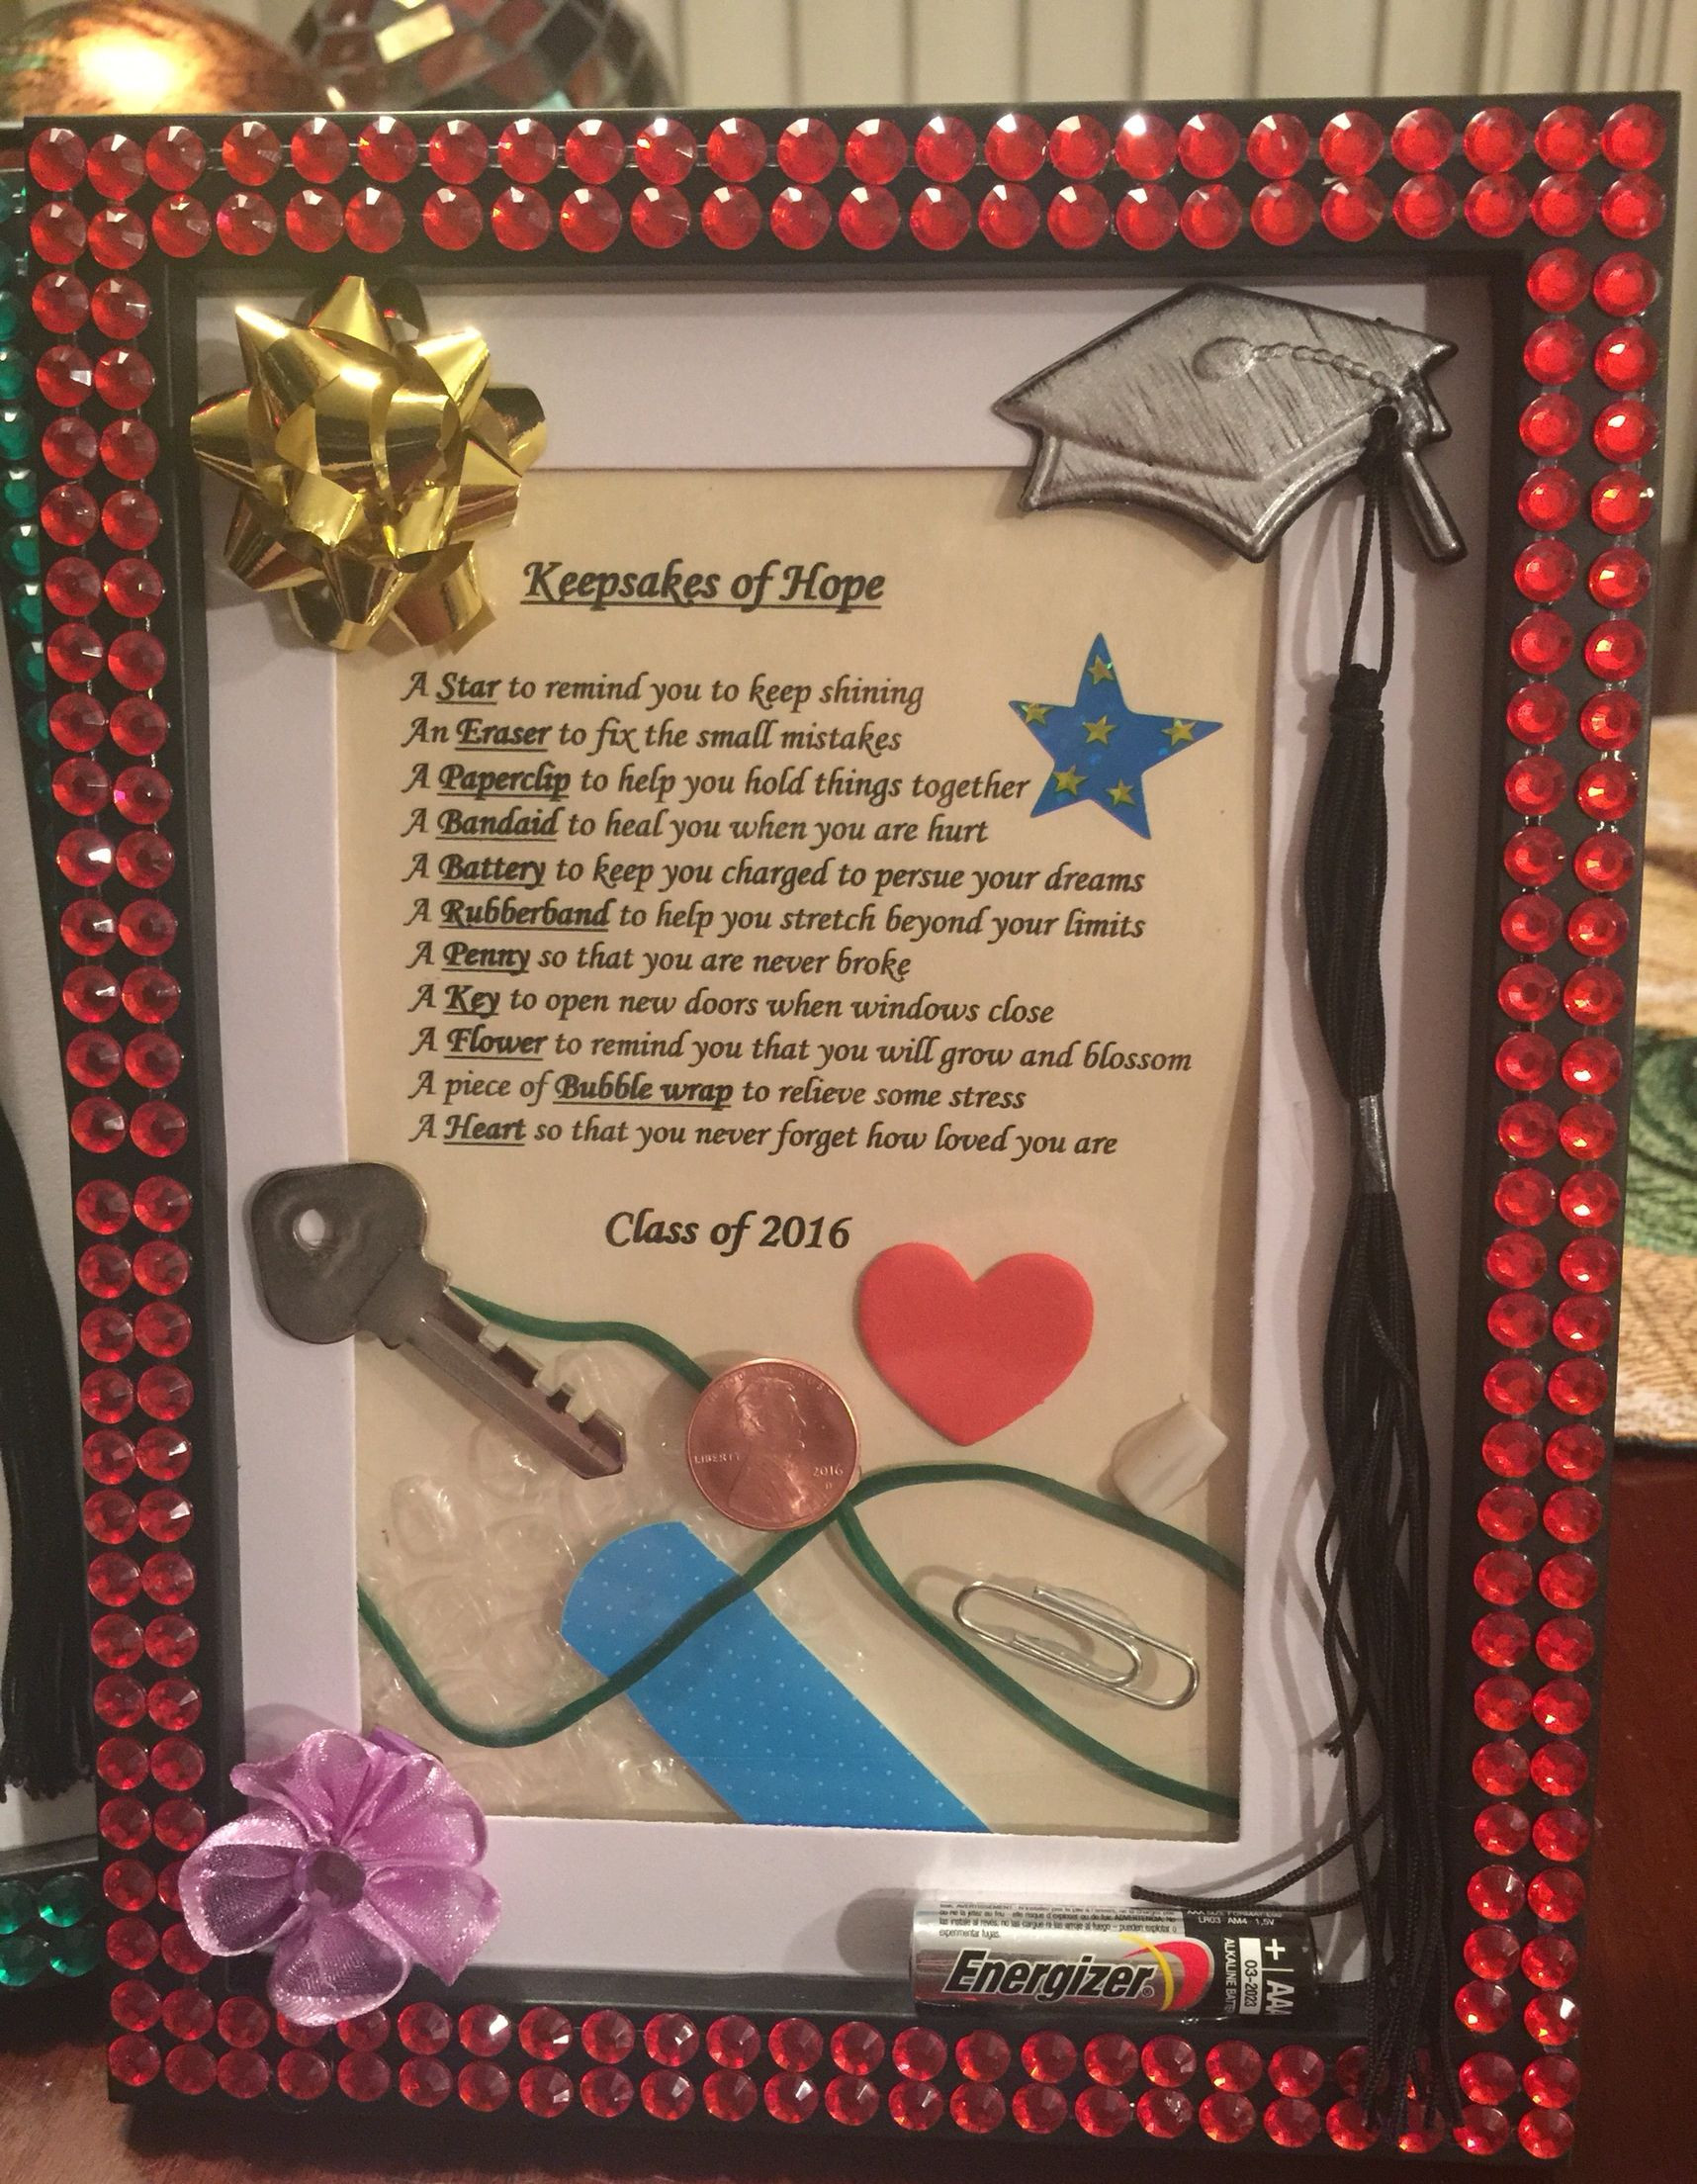 Graduation Gift Ideas For Friends
 Graduation Gift Keepsakes of hope The perfect DIY